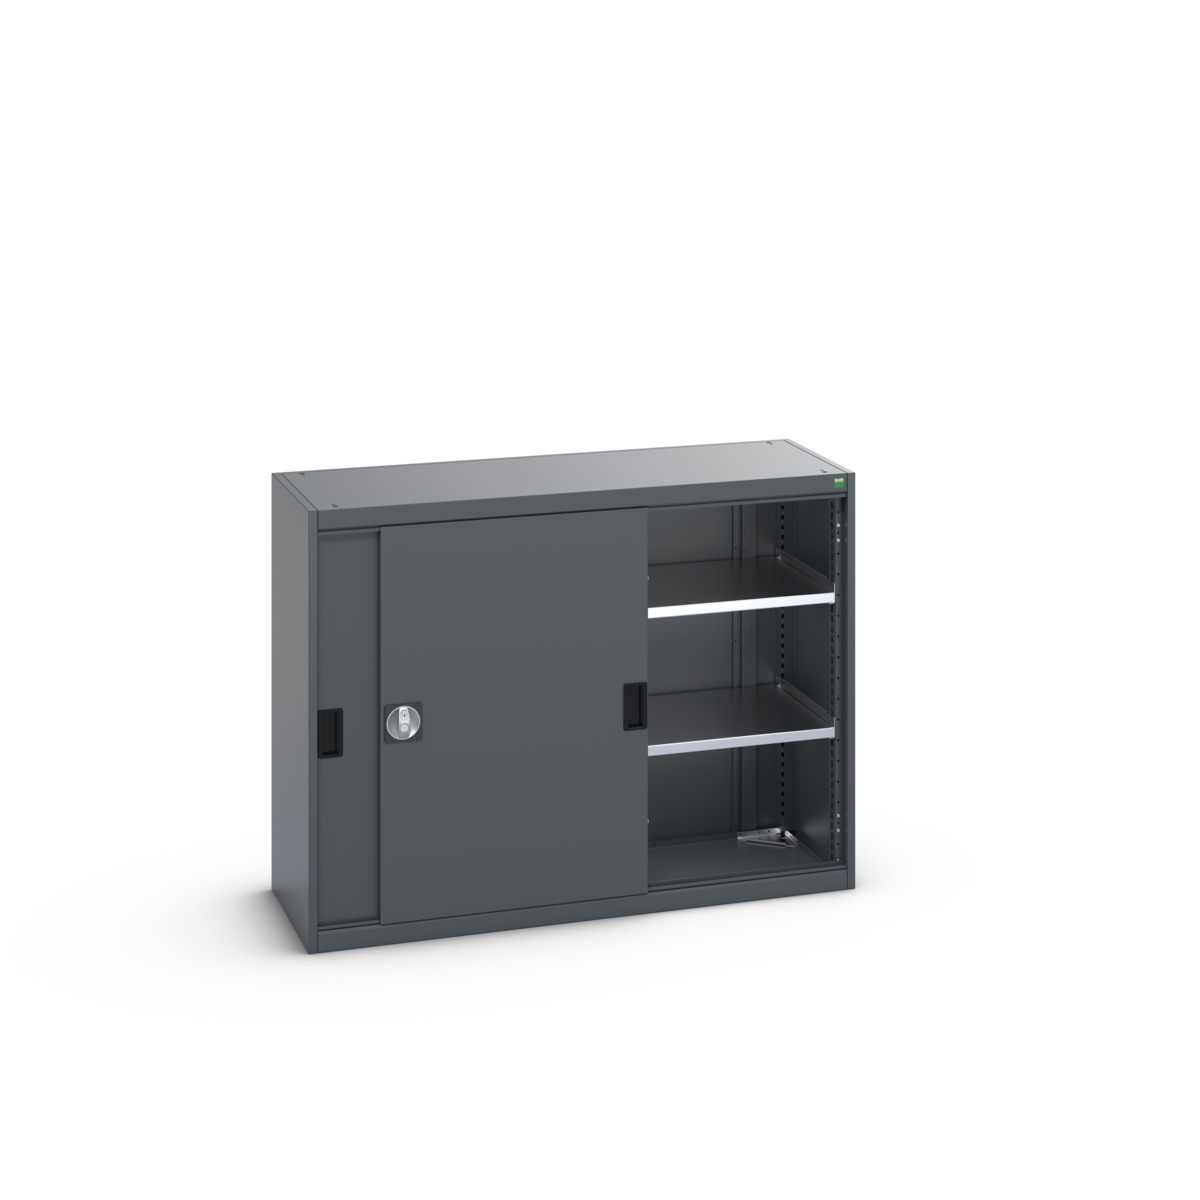 40014060.77V - Armoire Cubio SMS-13510-1.1